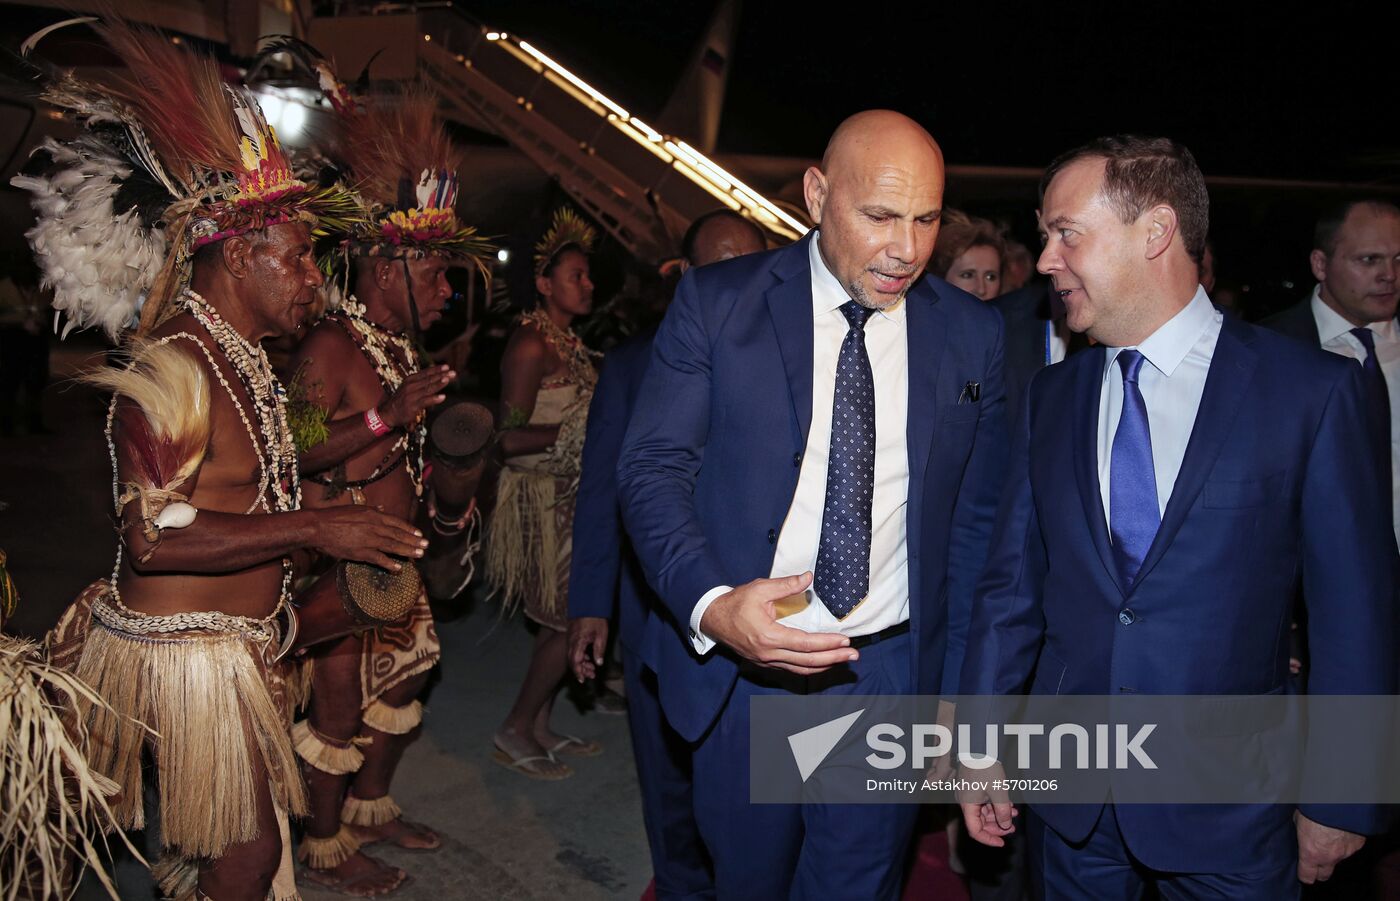 Prime Minister Dmitry Medvedev visits Papua New Guinea to participate in APEC summit